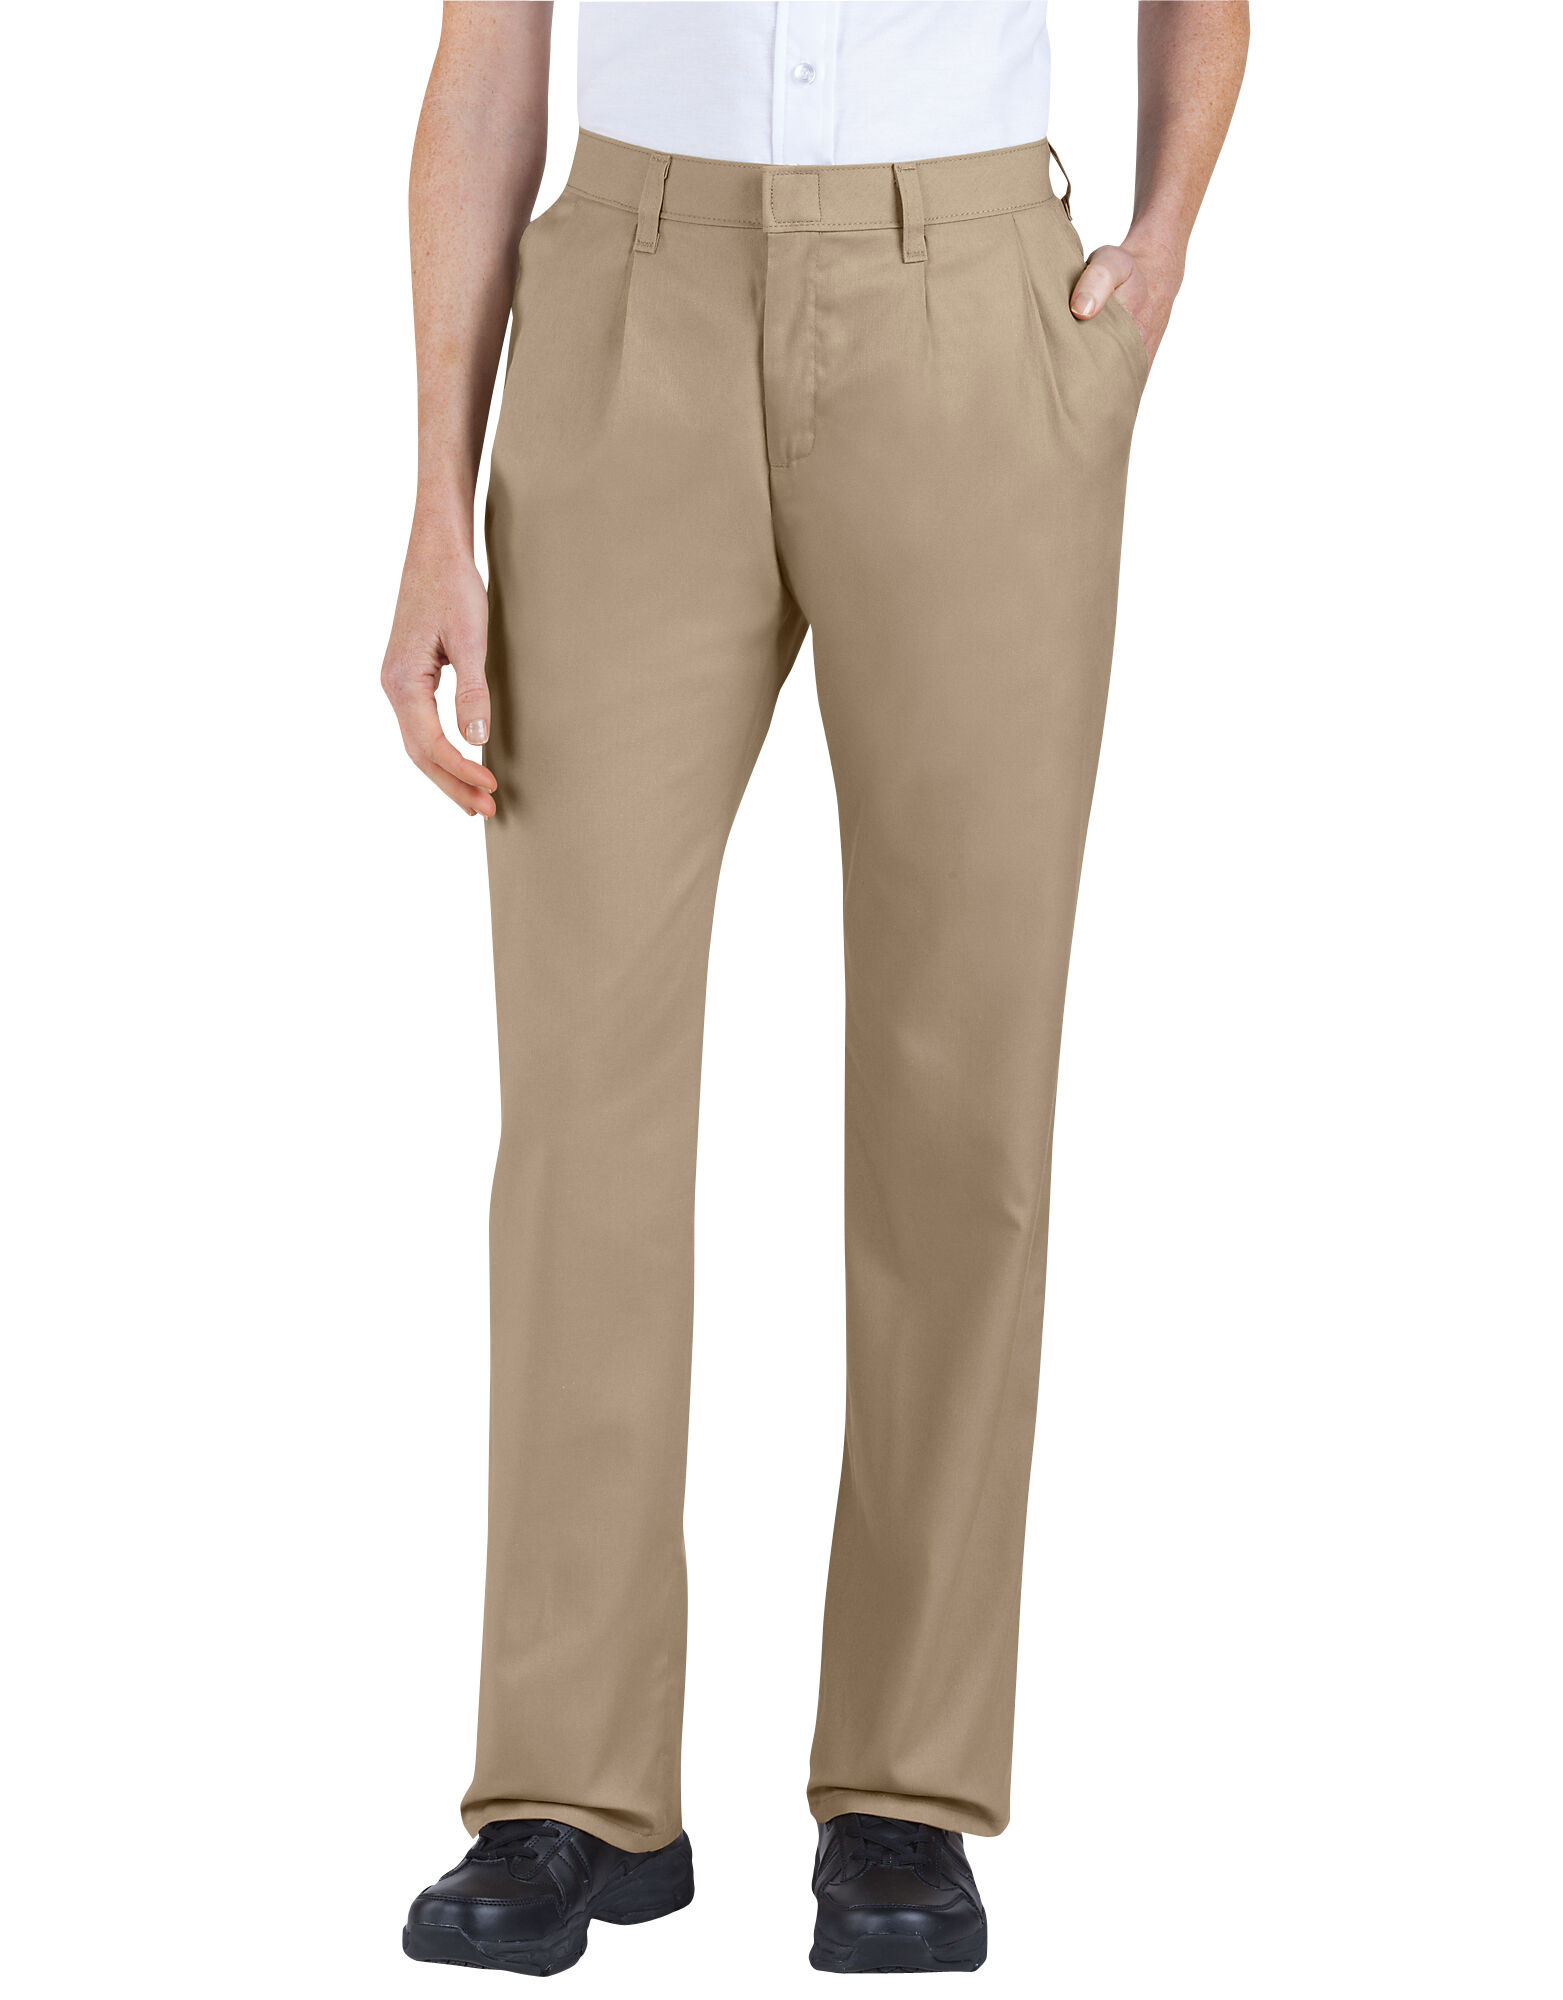 Women's Pleated Pants Military Khaki | Straight Leg, Relaxed Fit | Dickies